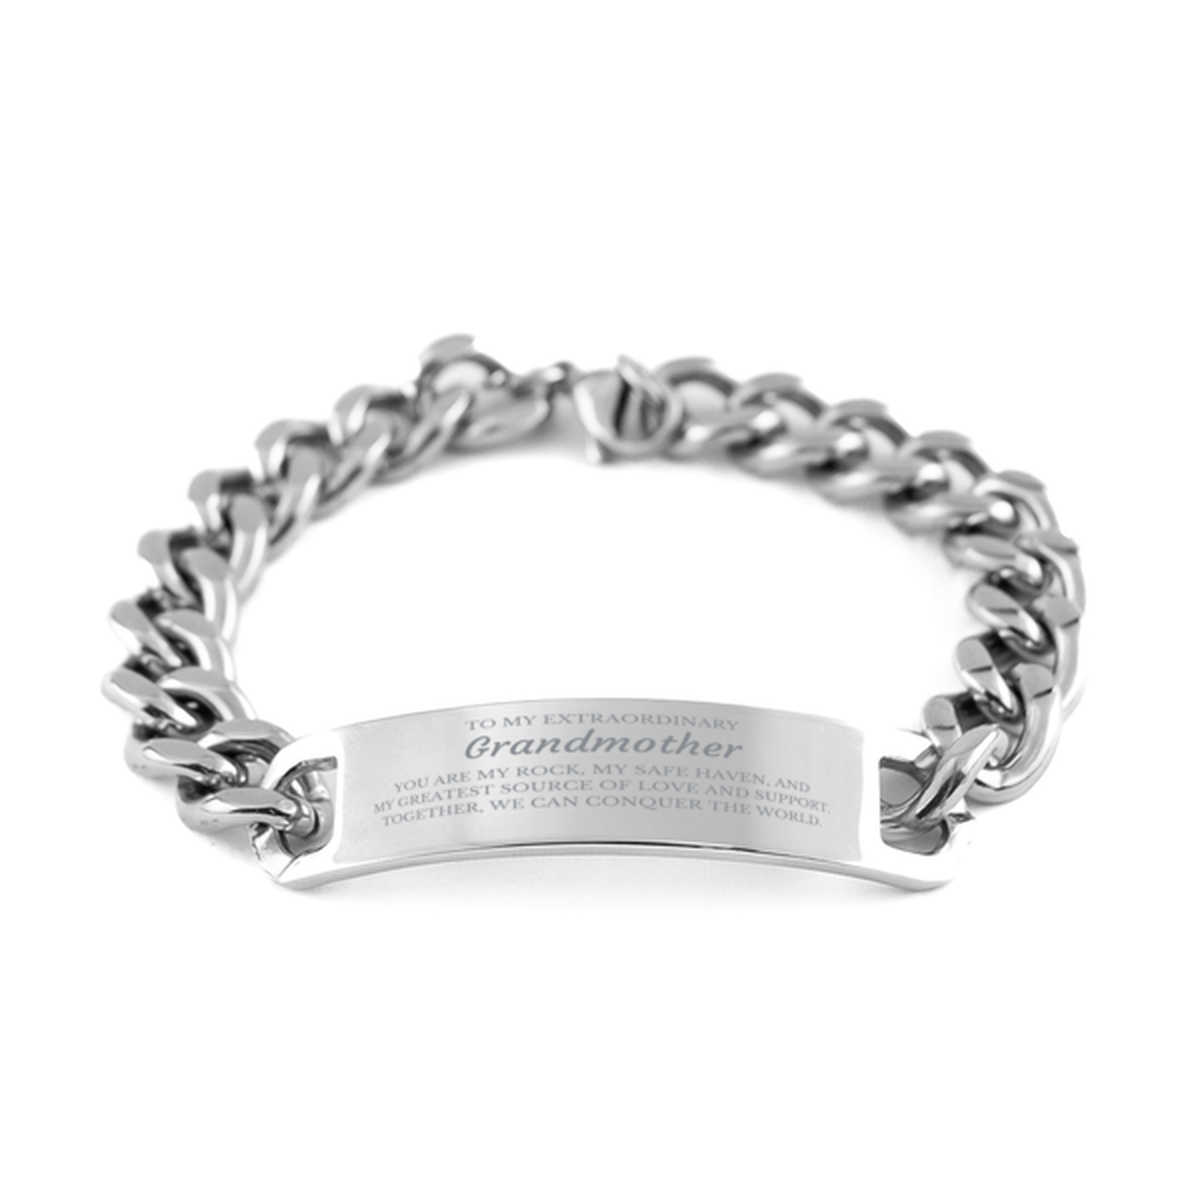 To My Extraordinary Grandmother Gifts, Together, we can conquer the world, Birthday Cuban Chain Stainless Steel Bracelet For Grandmother, Christmas Gifts For Grandmother